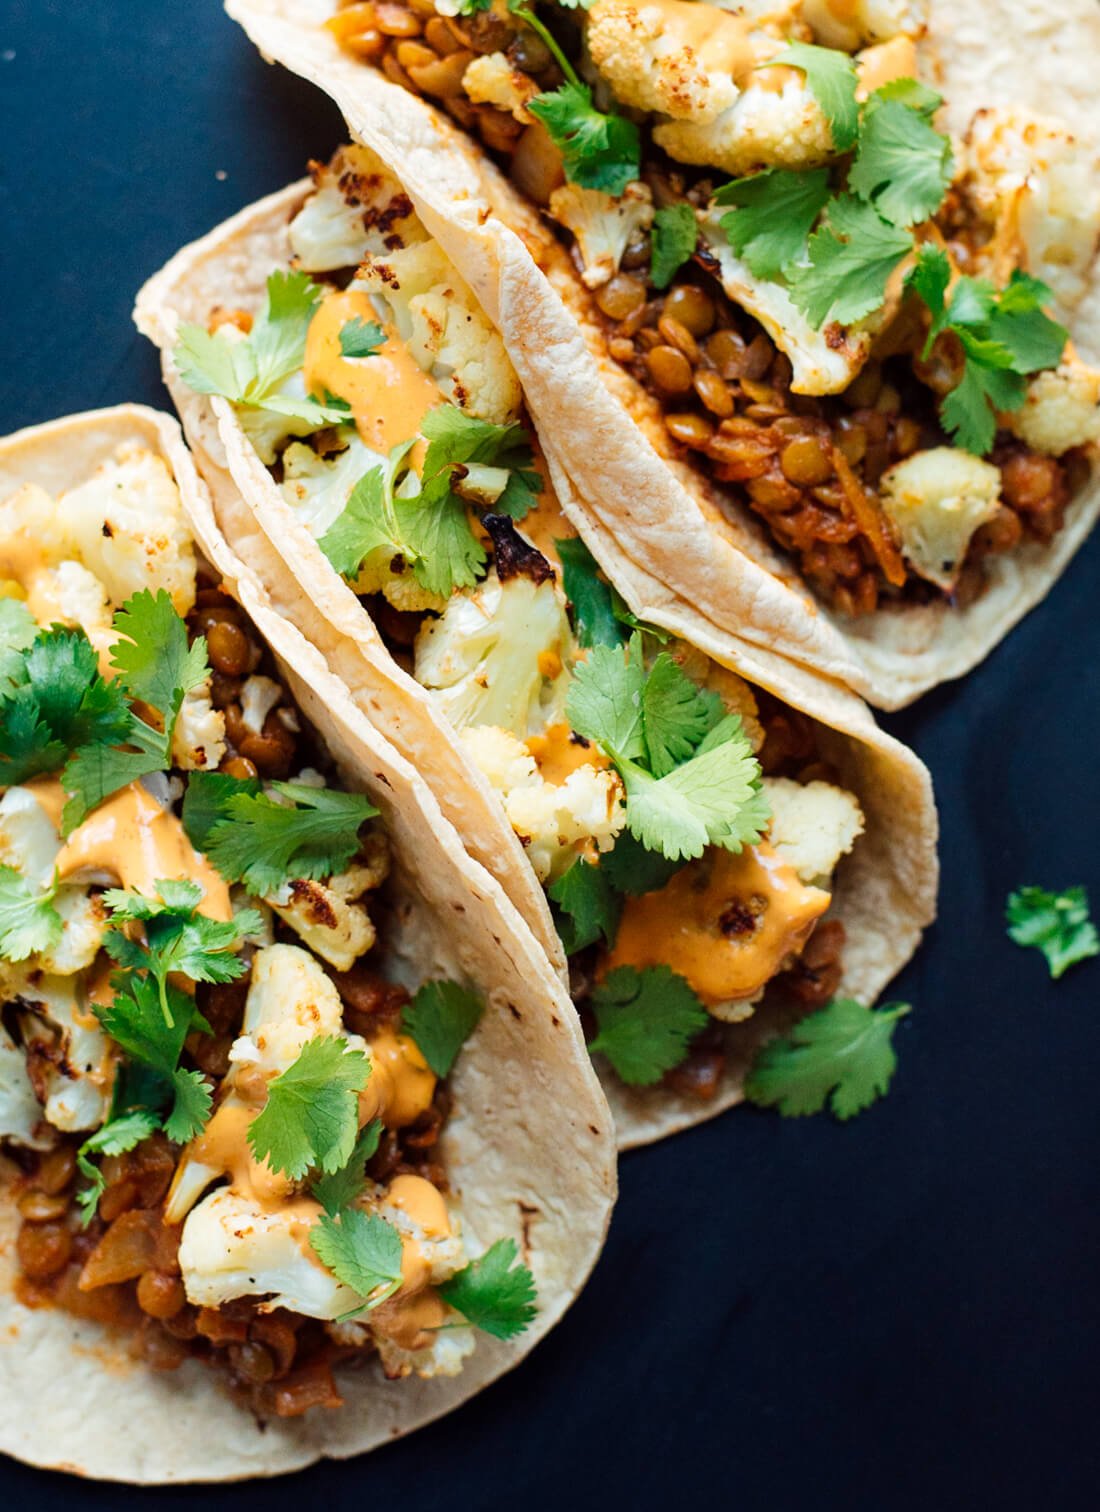 Roasted cauliflower, seasoned lentils and creamy chipotle sauce combine to create an unexpectedly delicious taco!